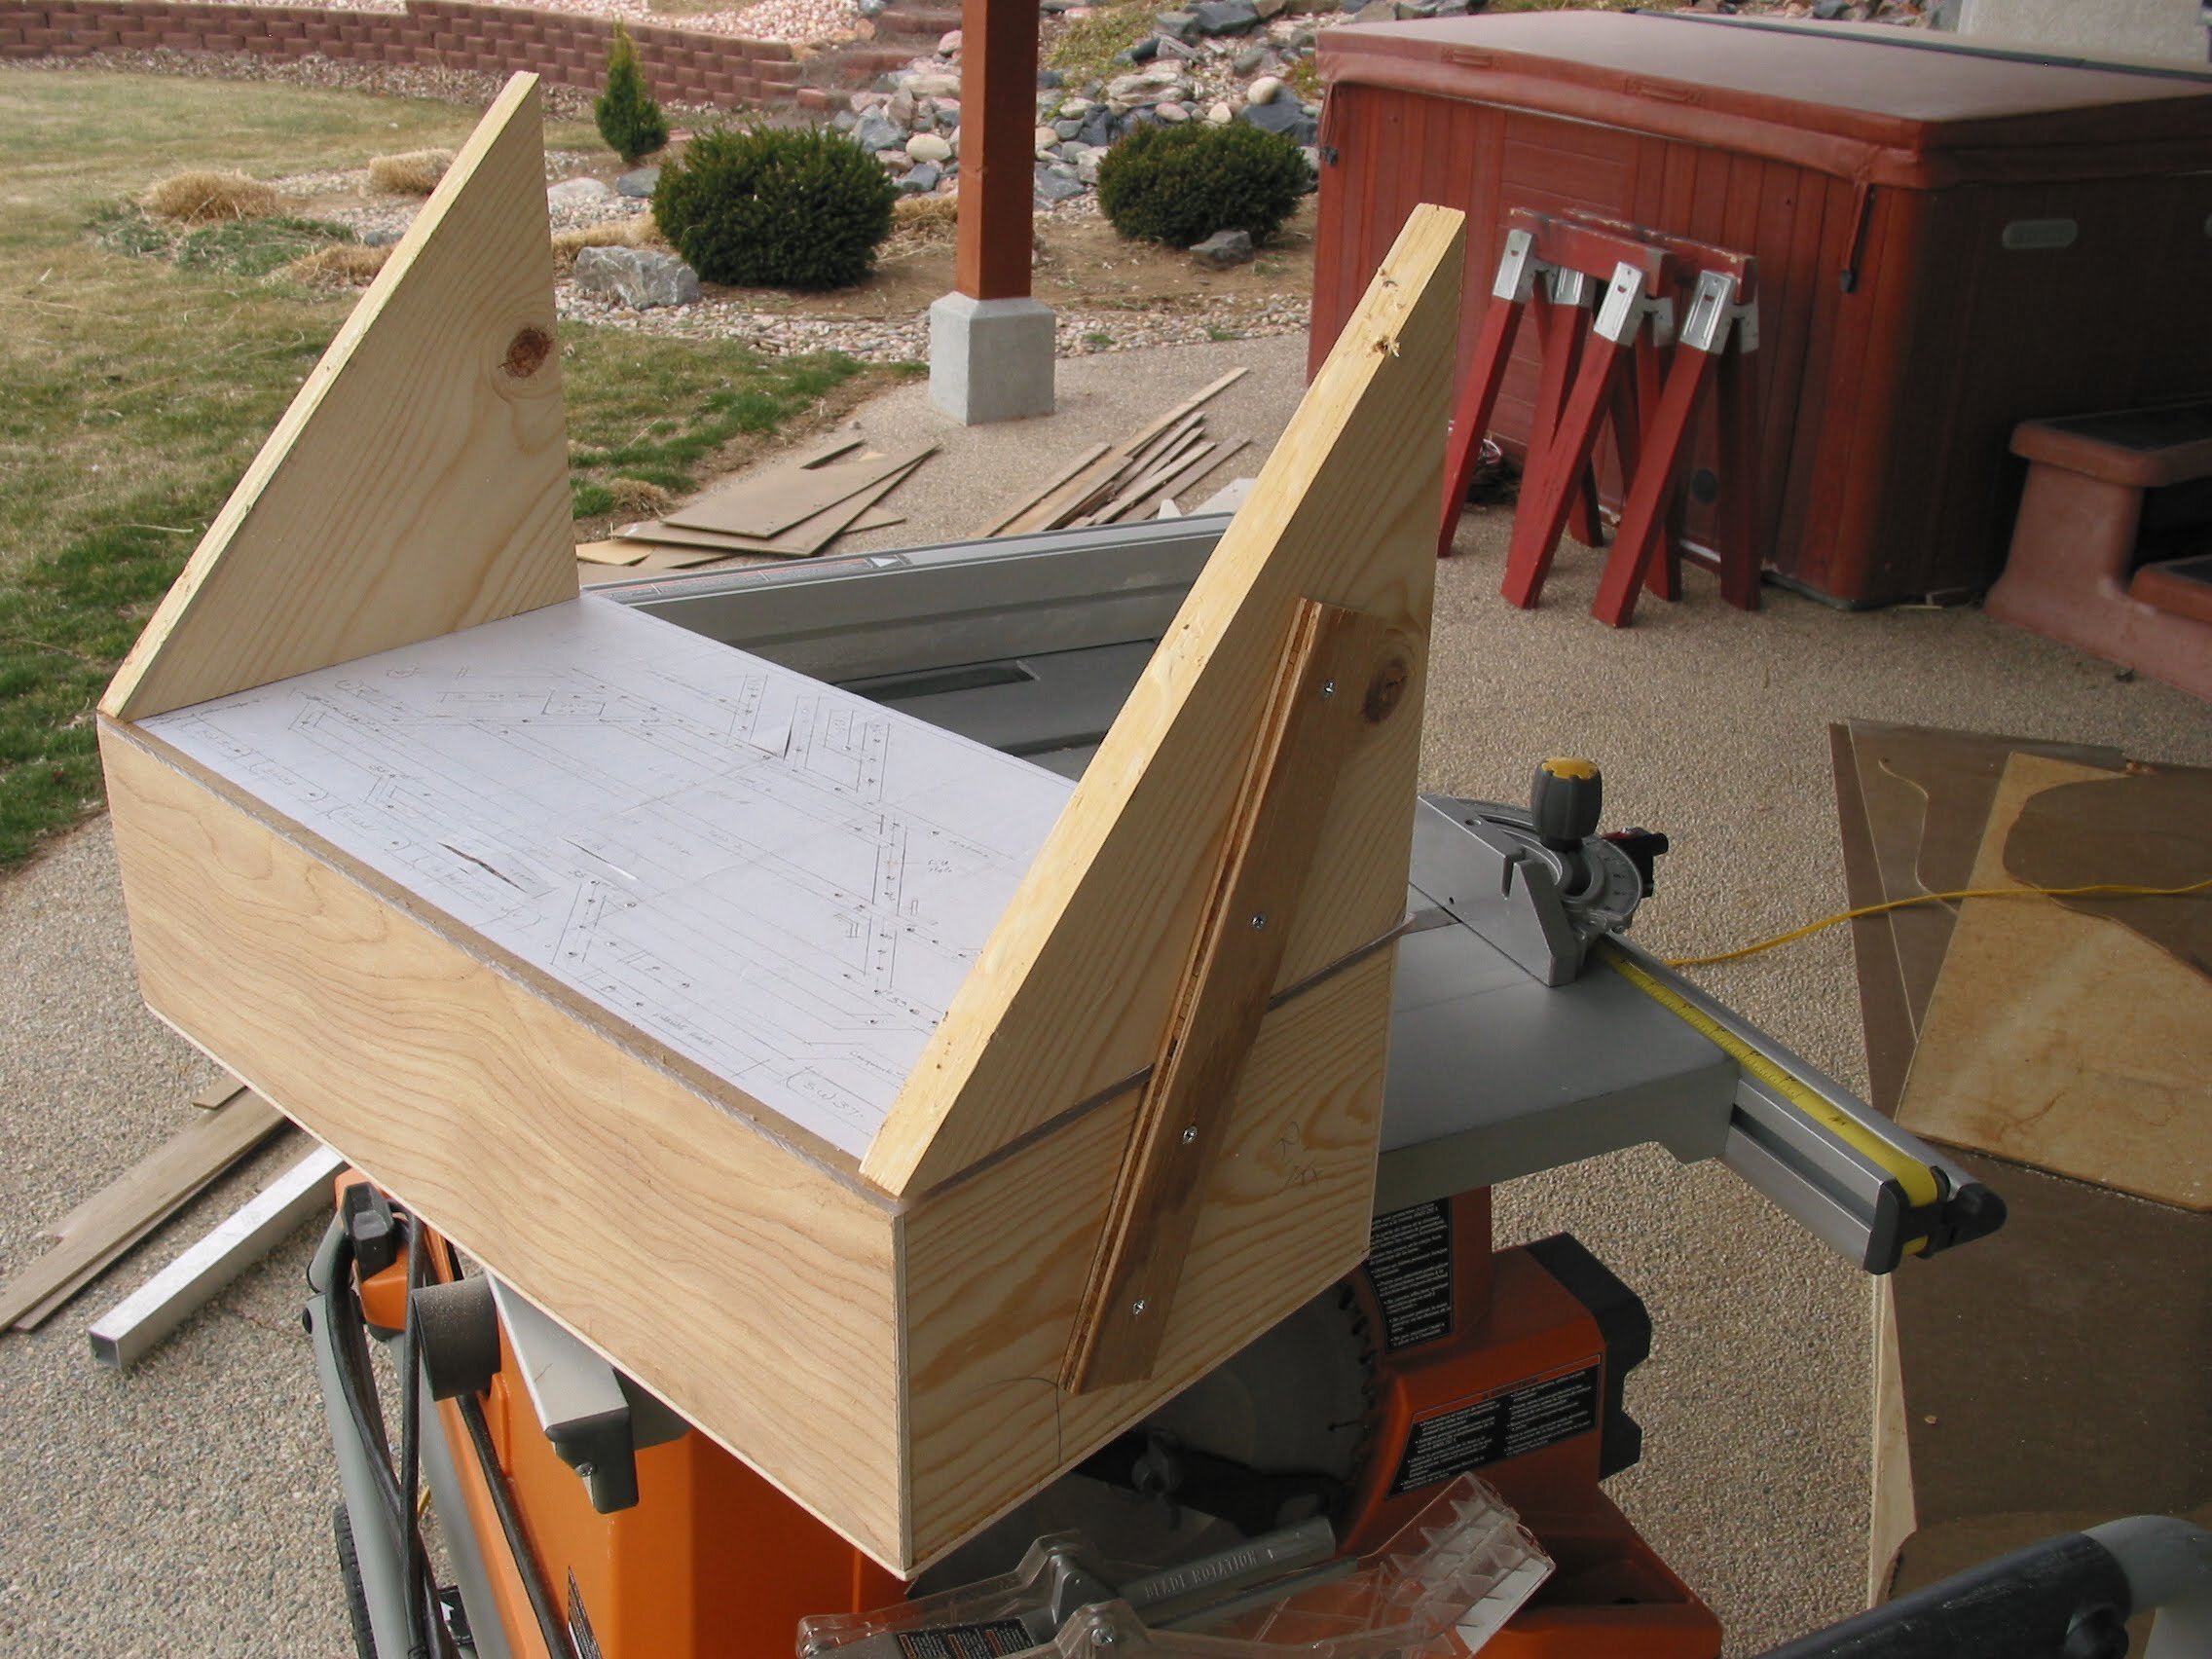  Building triangular mounting brackets for the panels. Depending upon aisle width, layout fascia height and thus viewing angle, the brackets varied greatly and all were one-of-a-kind. This photo shows the cut panel plex attached to reflector box with